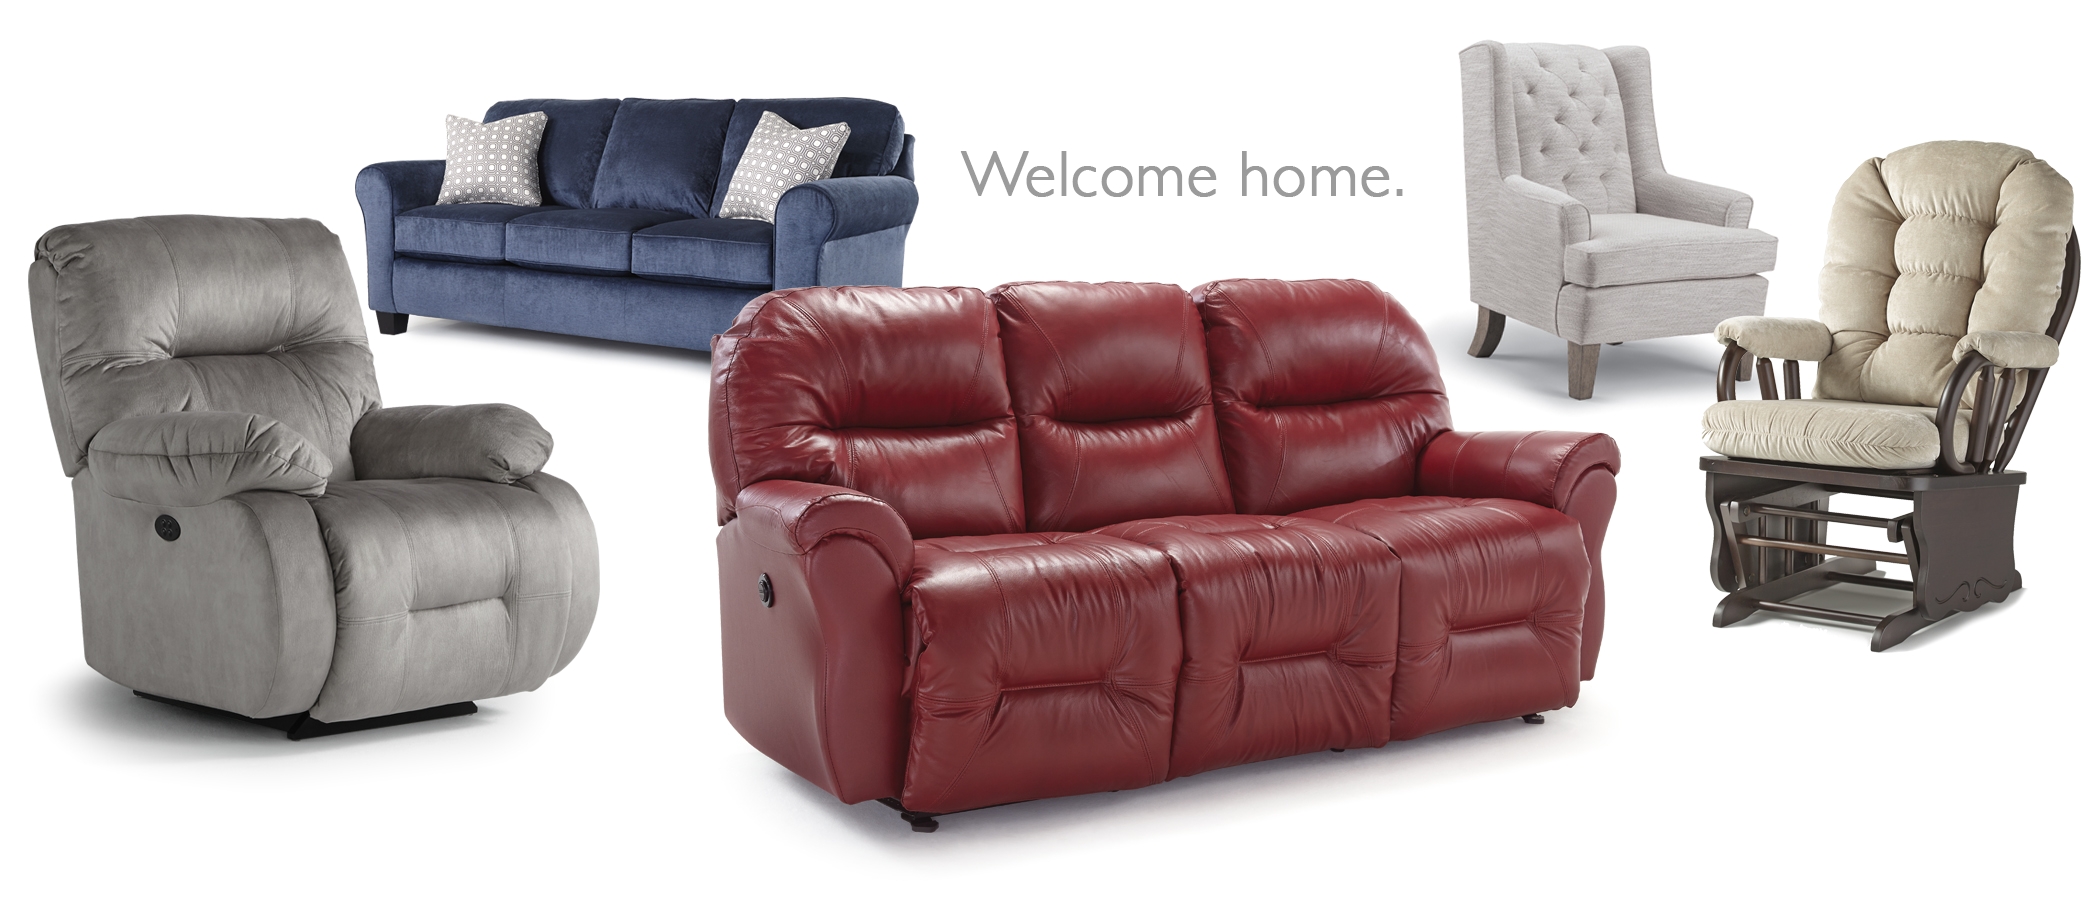 Best Rated Power Recliner Chairs Home Best Home Furnishings